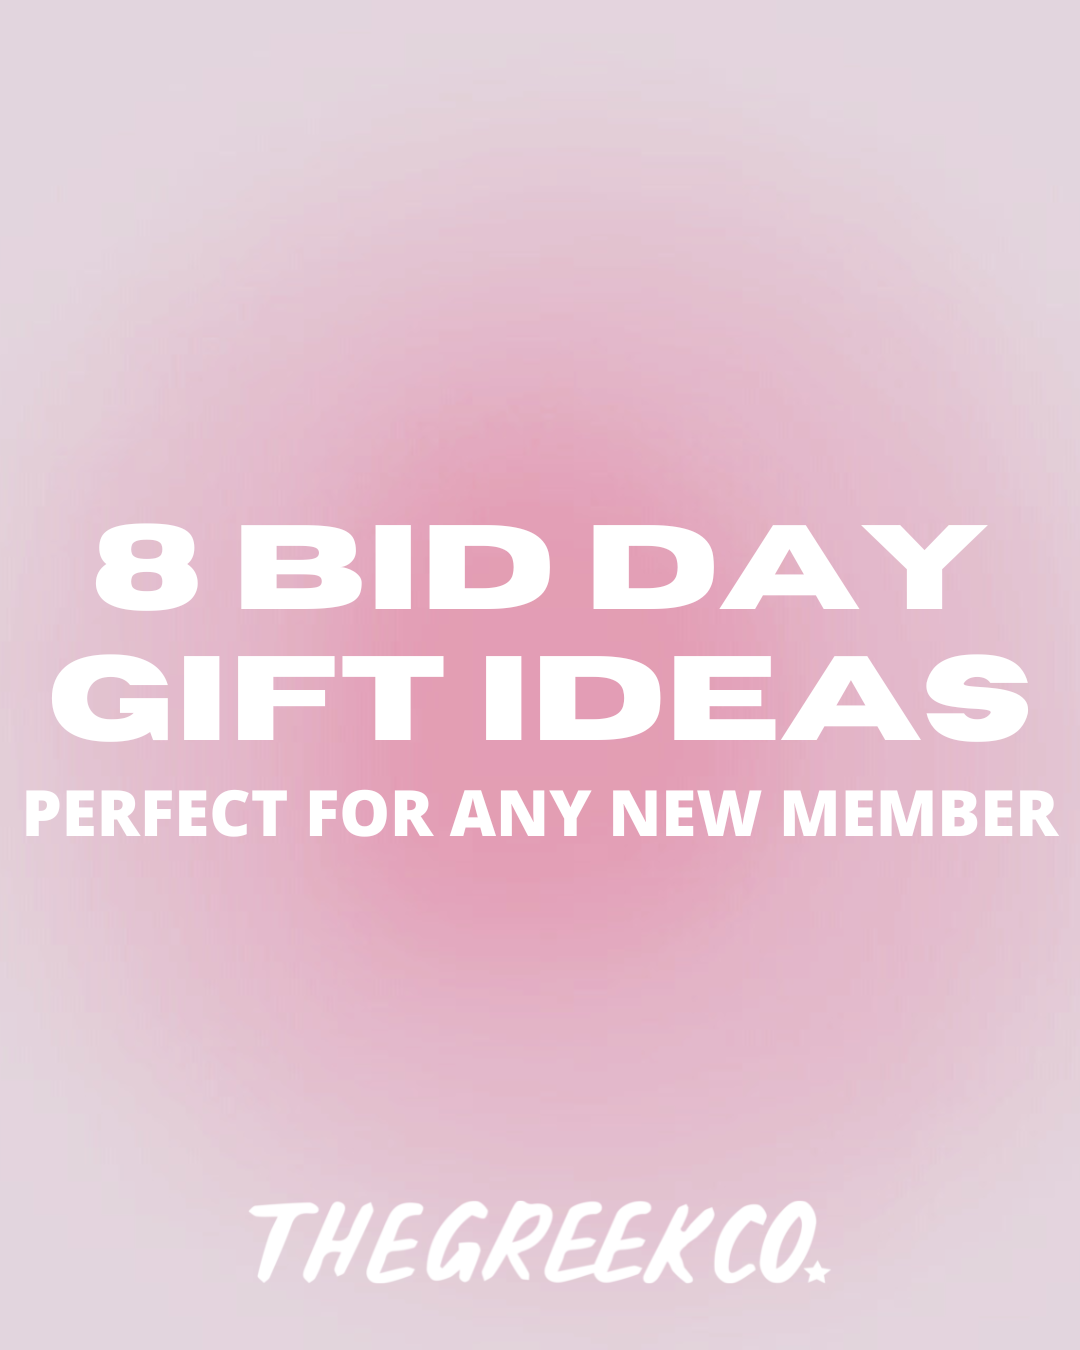 8 Bid Day Gift Ideas Perfect for Any New Member - The Greek Co. Blog Post